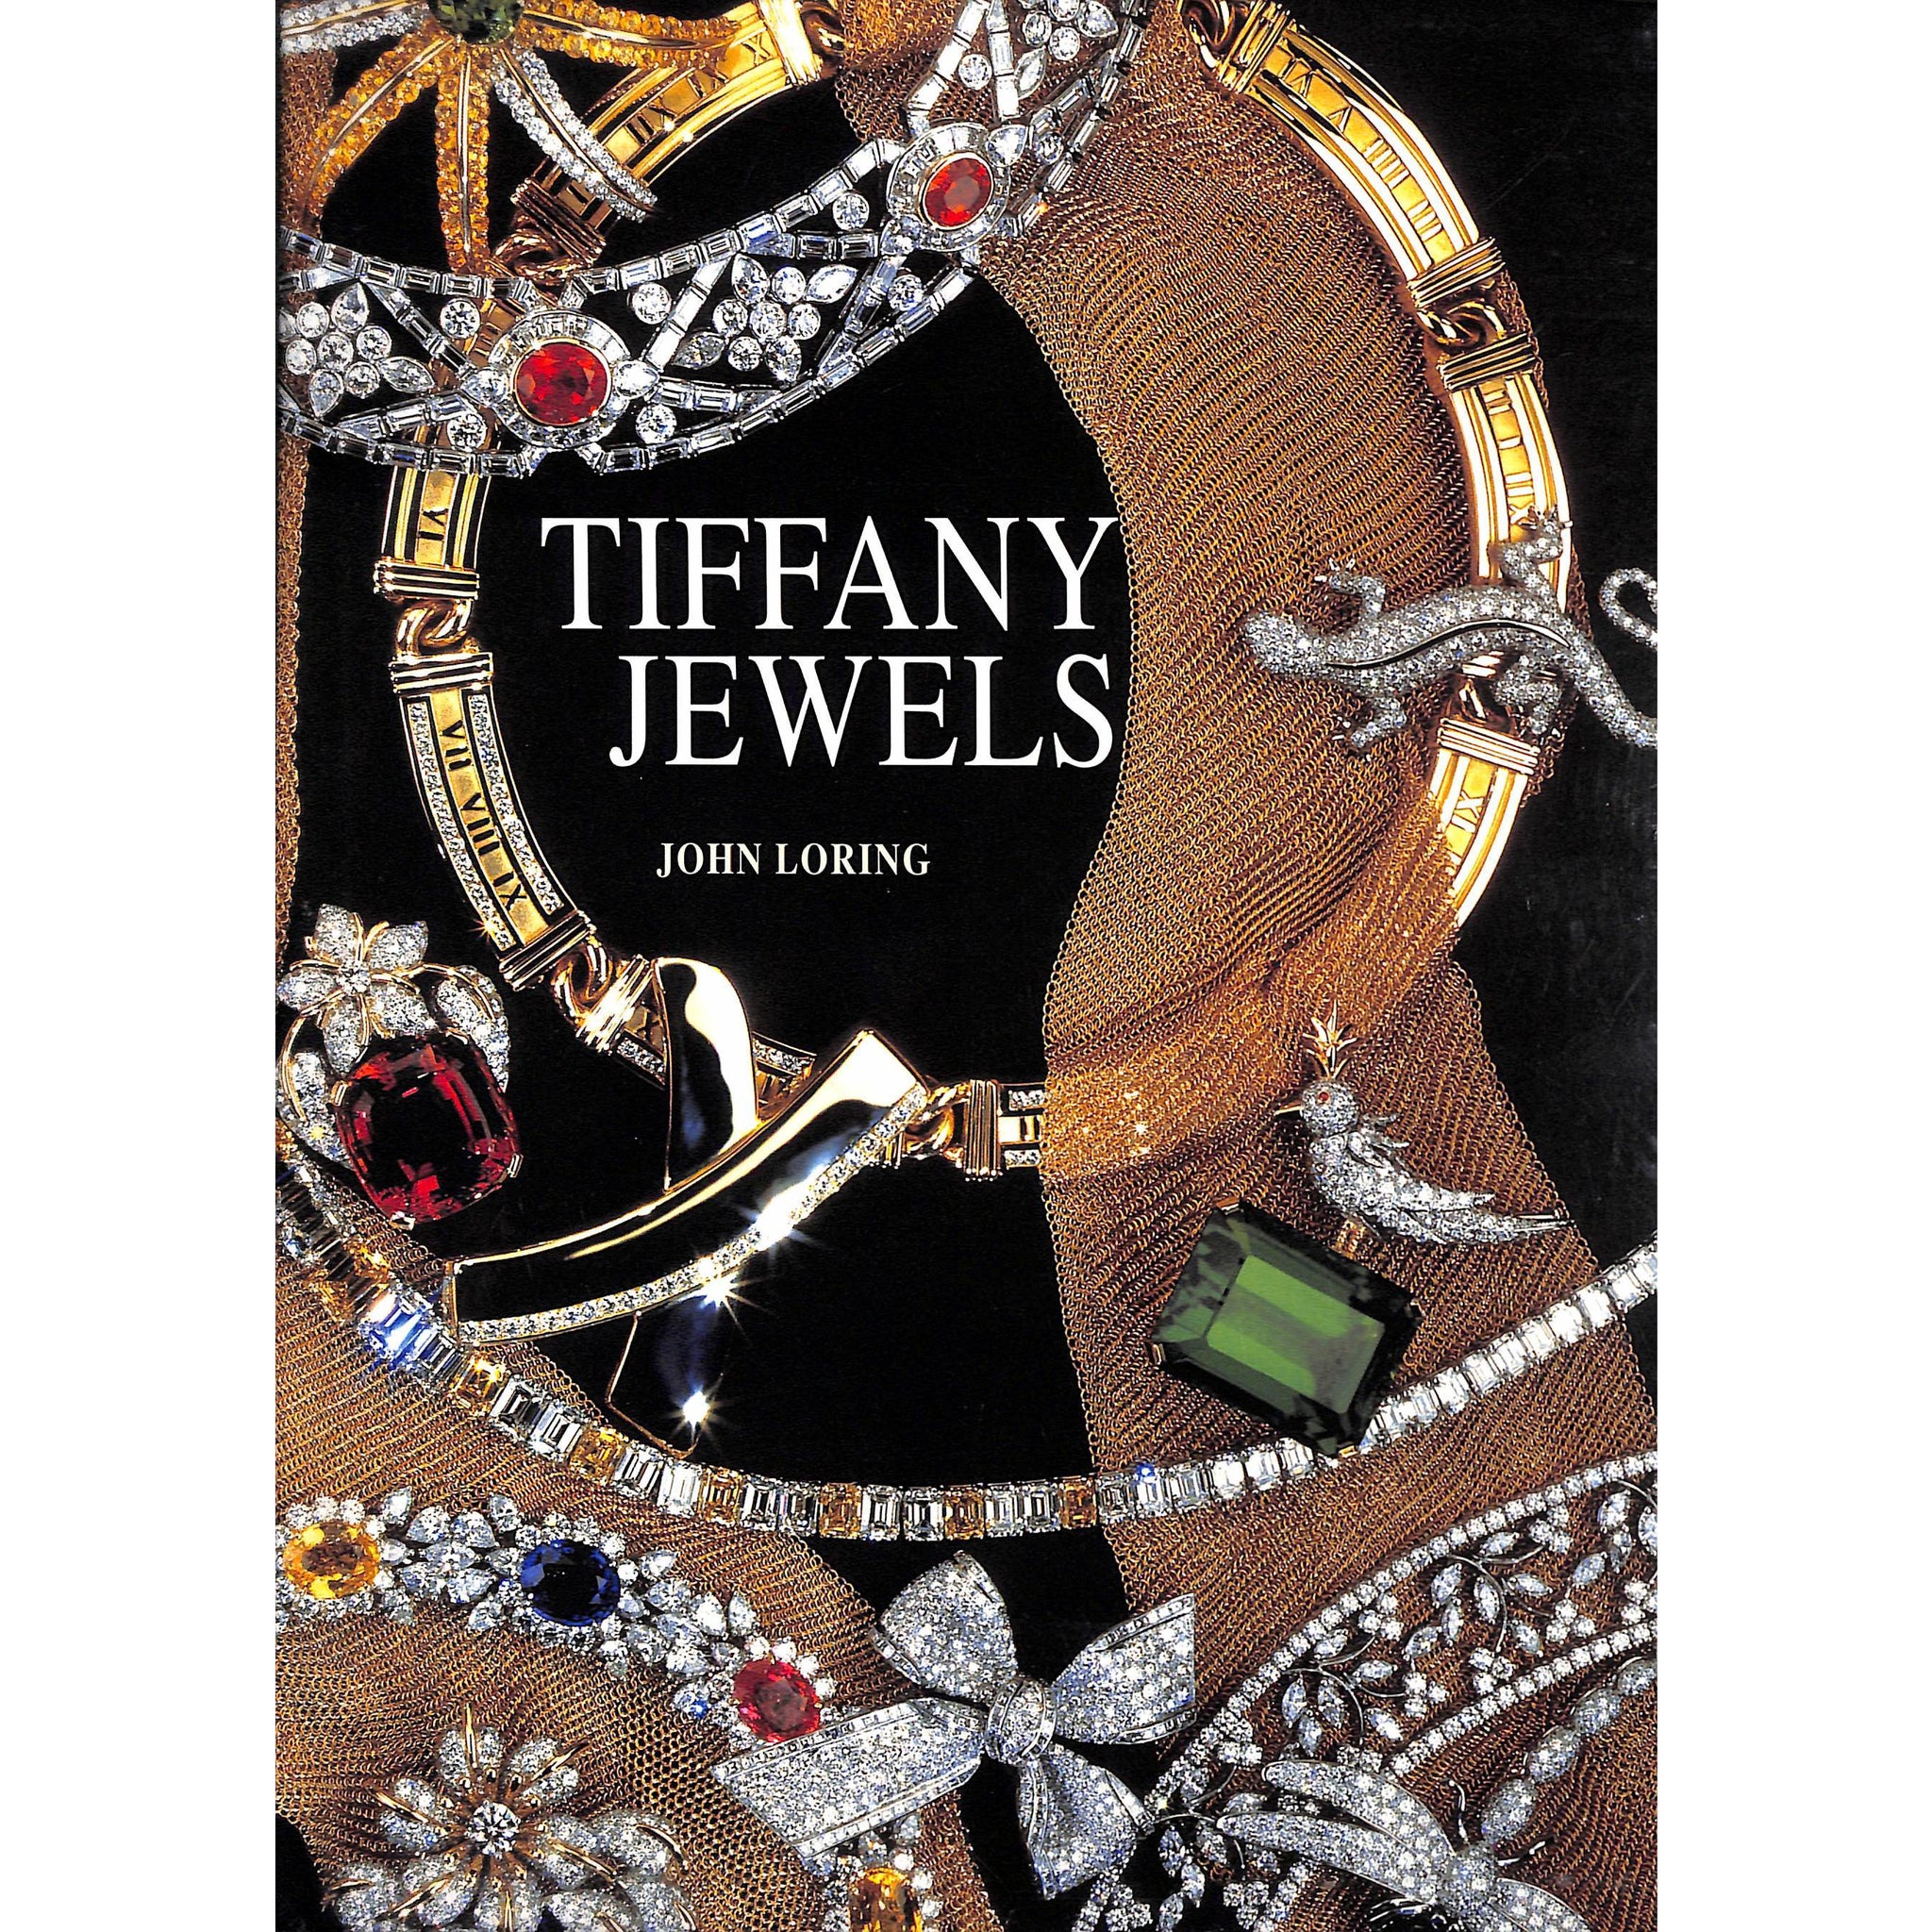 5 BOOKS ABOUT TIFFANY & CO., SIGNED BY JOHN LORING